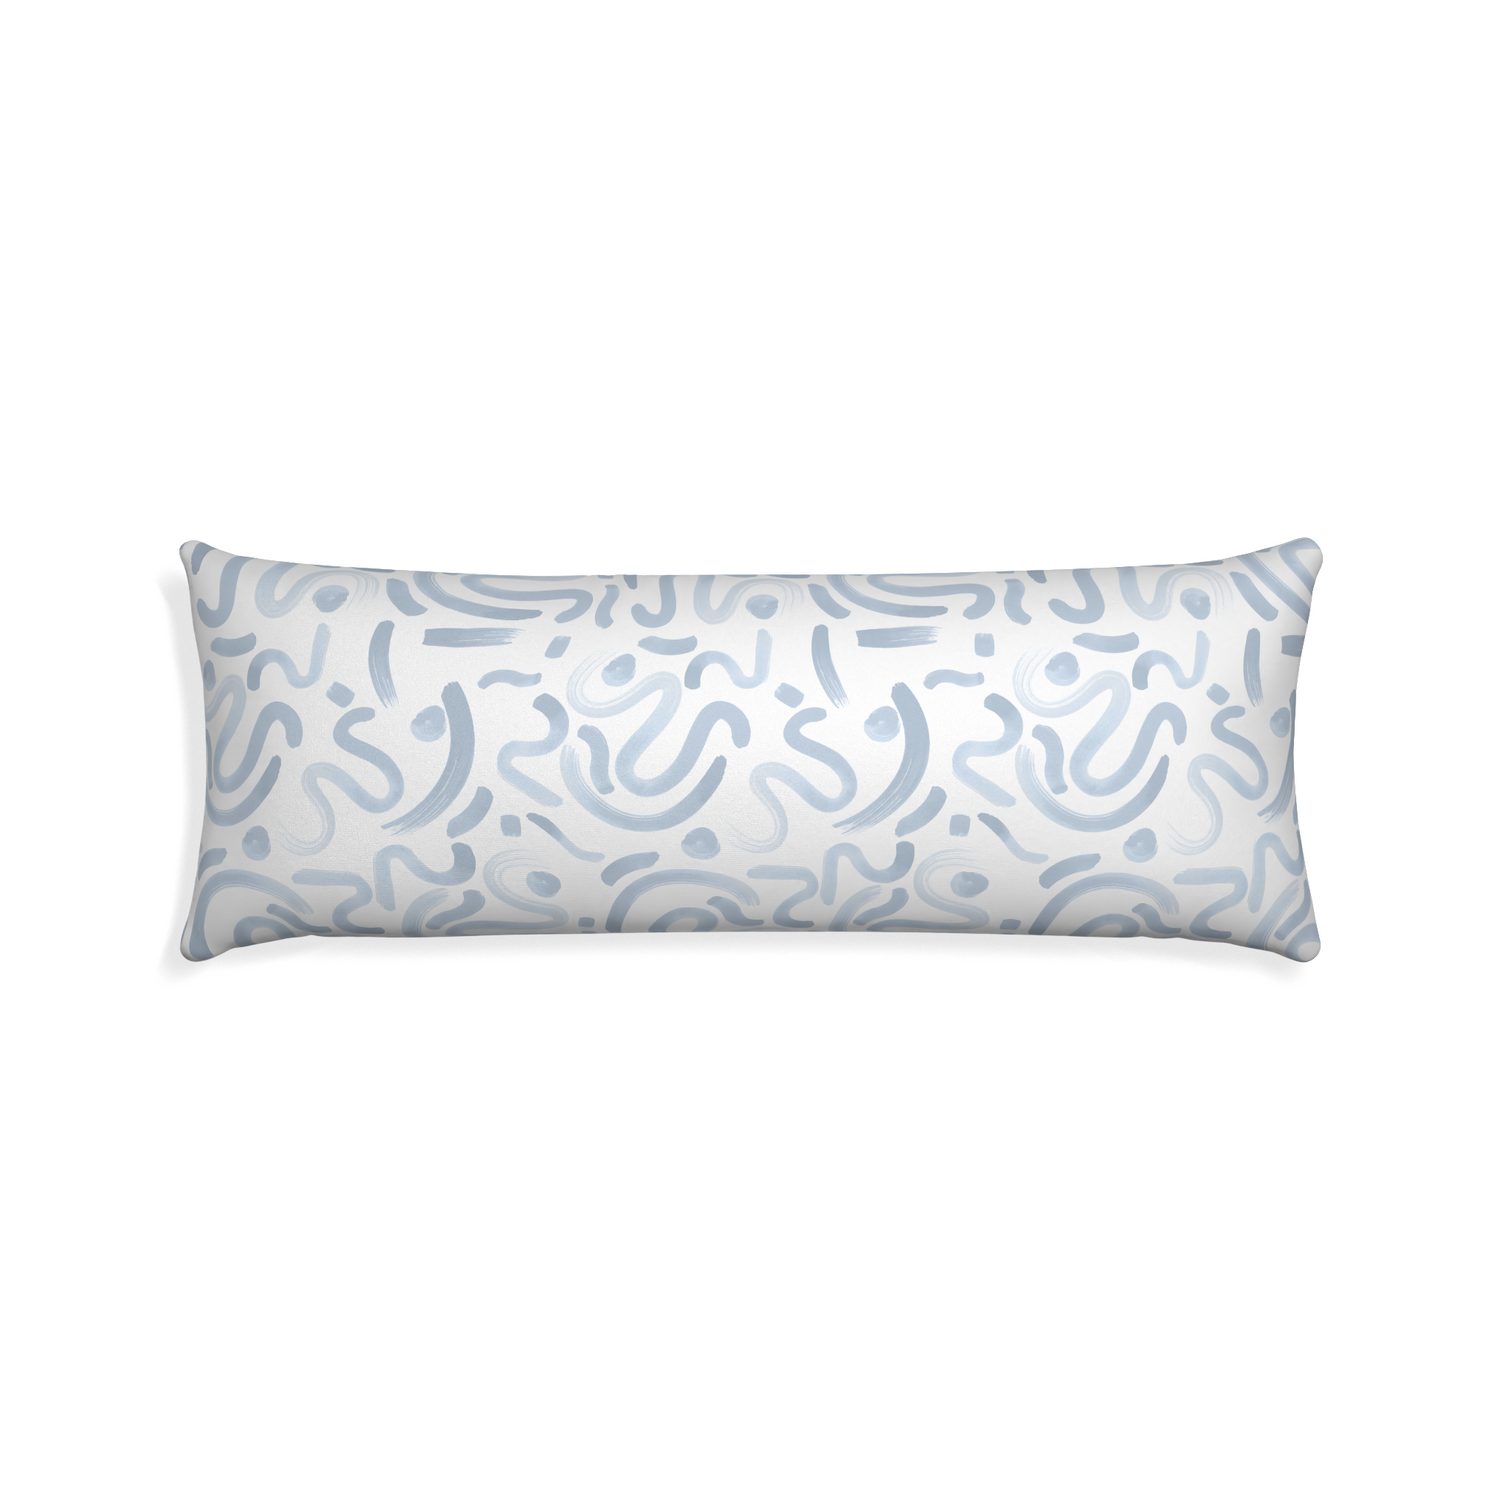 Xl-lumbar hockney sky custom pillow with none on white background